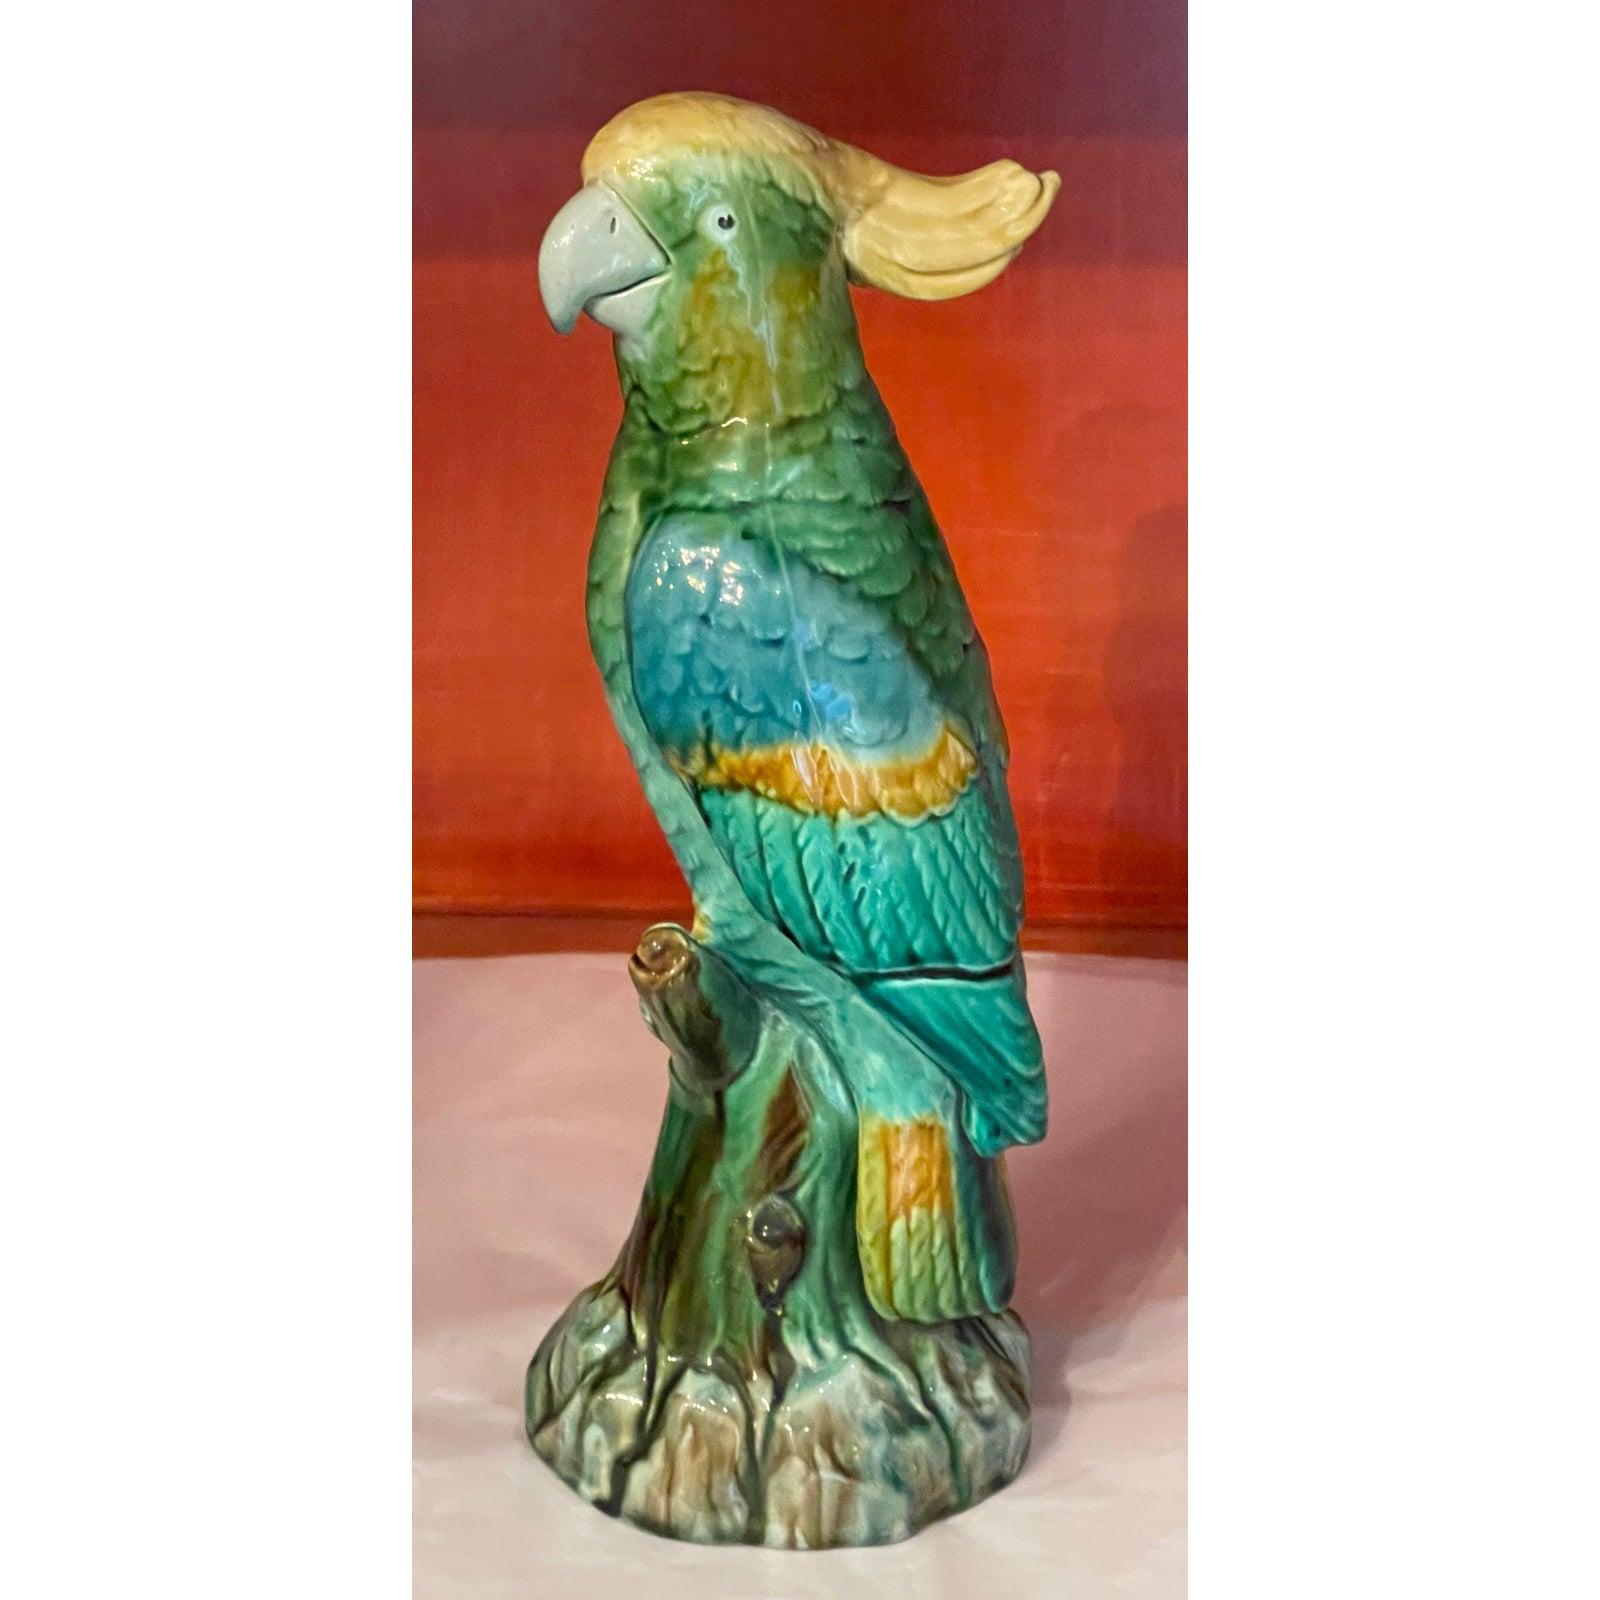 Antique 19th century Minton Majolica pottery parrot. An excellent example with fabulous coloring by Minton.

Additional information:
Materials: pottery.
Color: green.
Brand: Minton.
Designer: Minton.
Period: 19th century.
Styles: